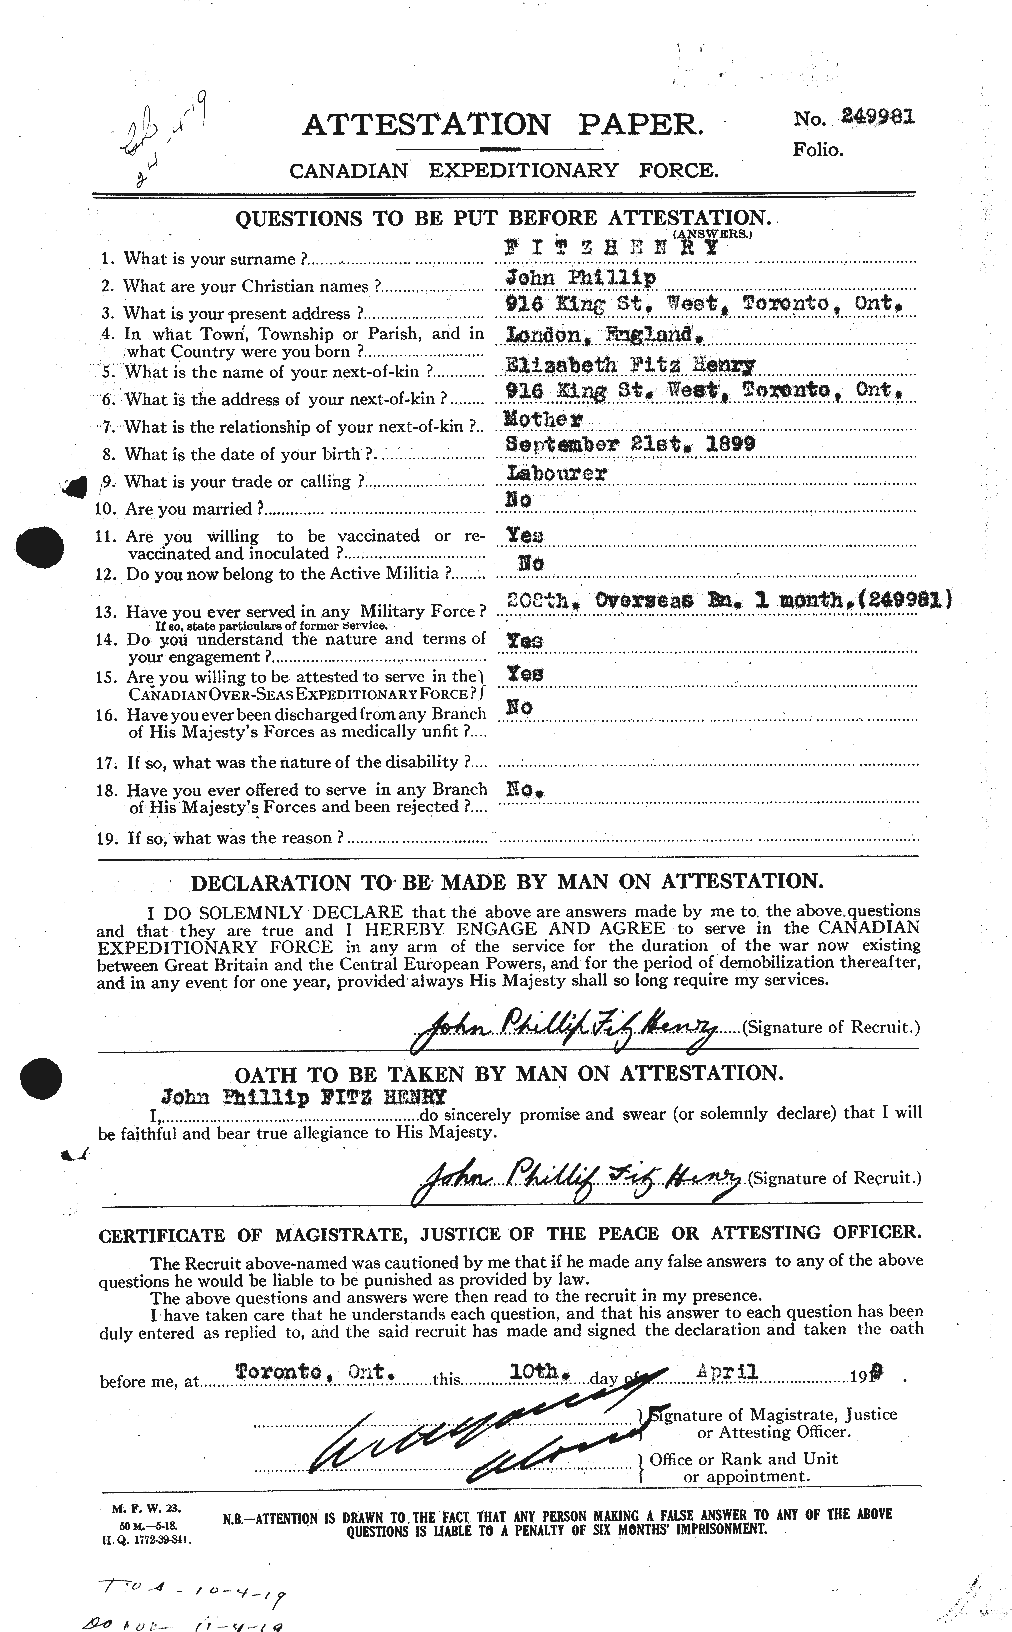 Personnel Records of the First World War - CEF 326724a